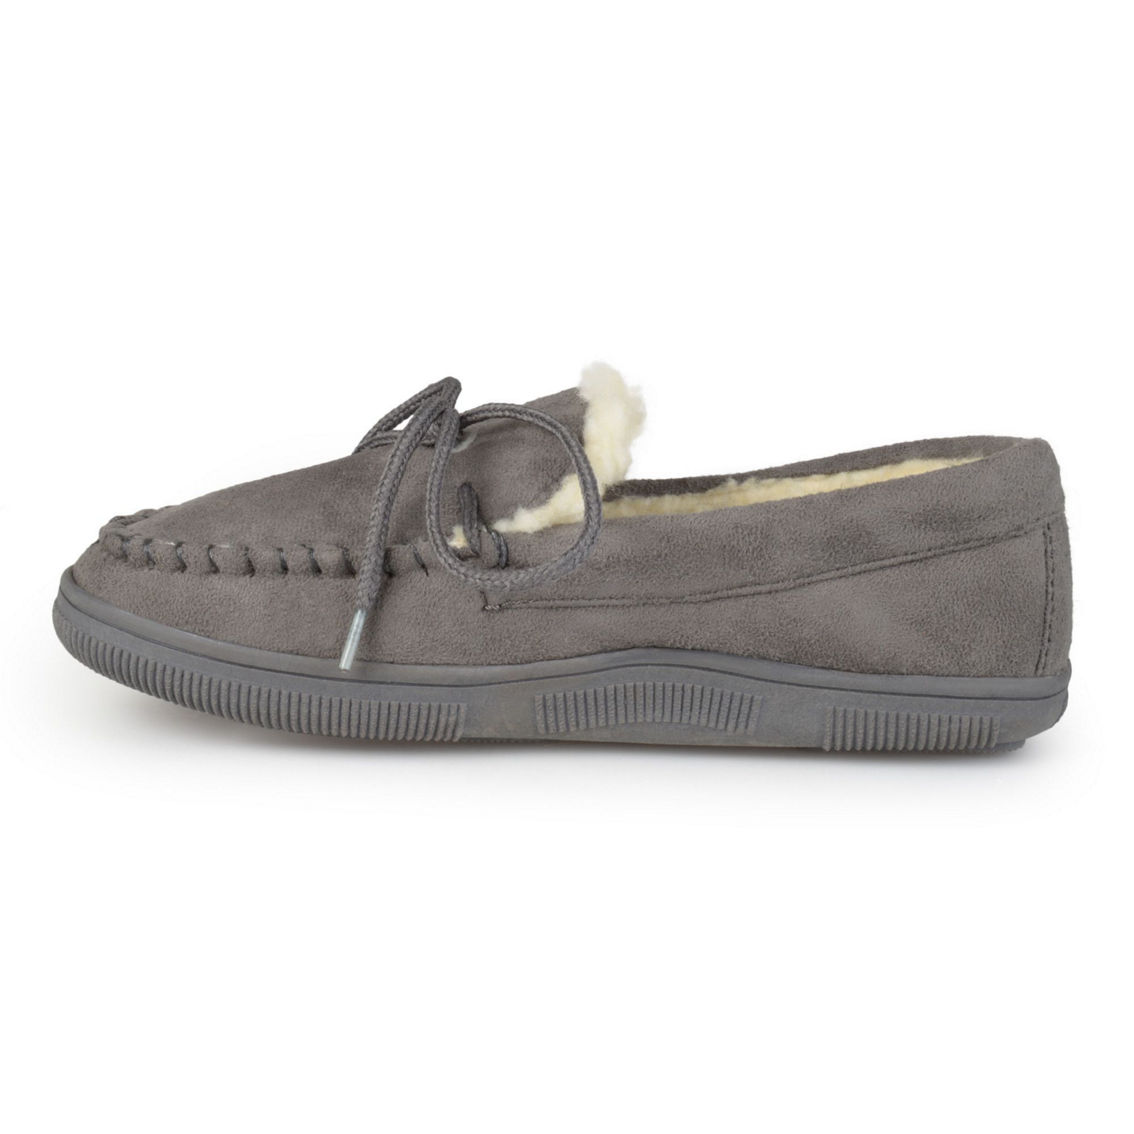 Vance Co Men's Moccasin Slipper | Slippers | Shoes | Shop The Exchange